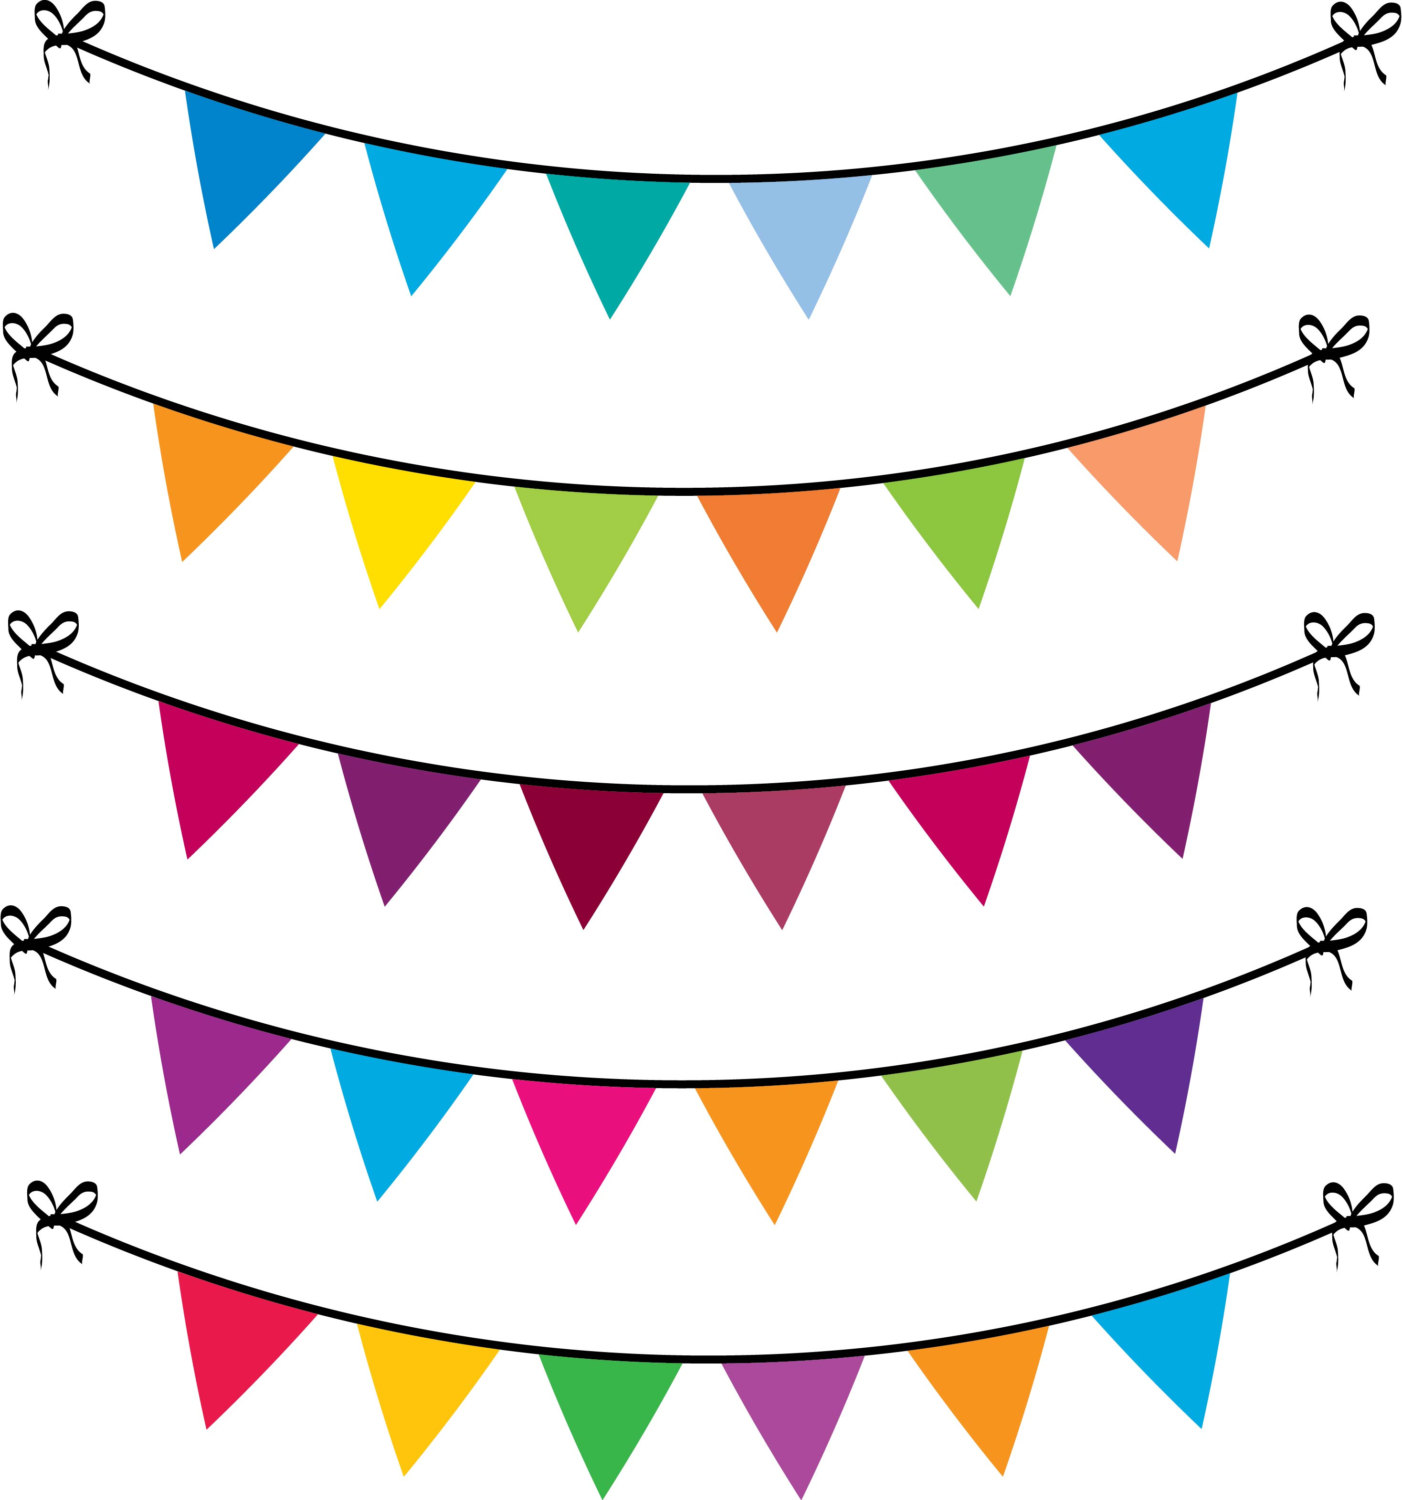 Clip Art Bunting Free - ClipArt Best